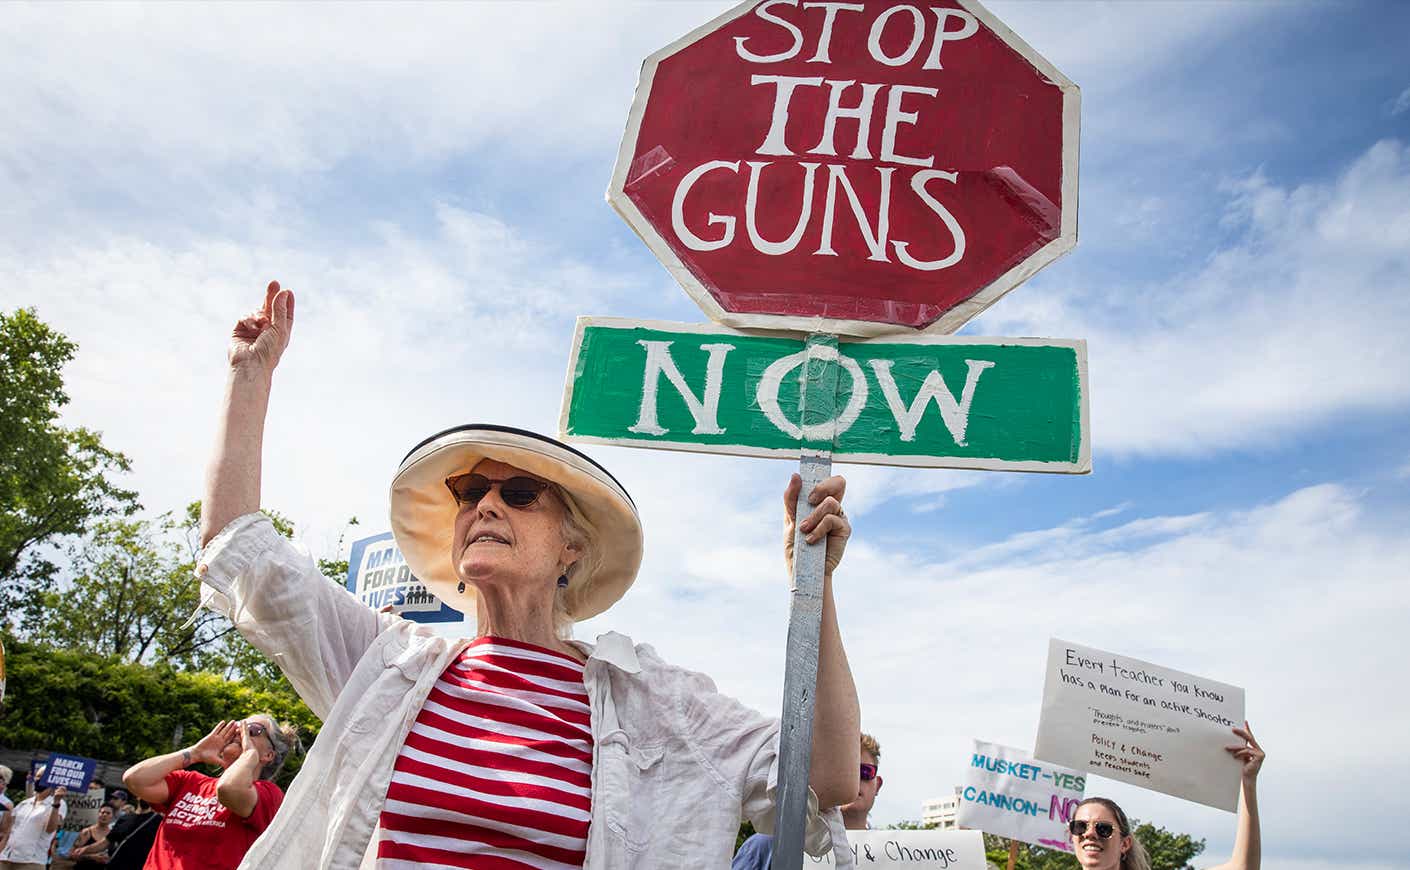 woman holding up sign saying "stop the guns now"